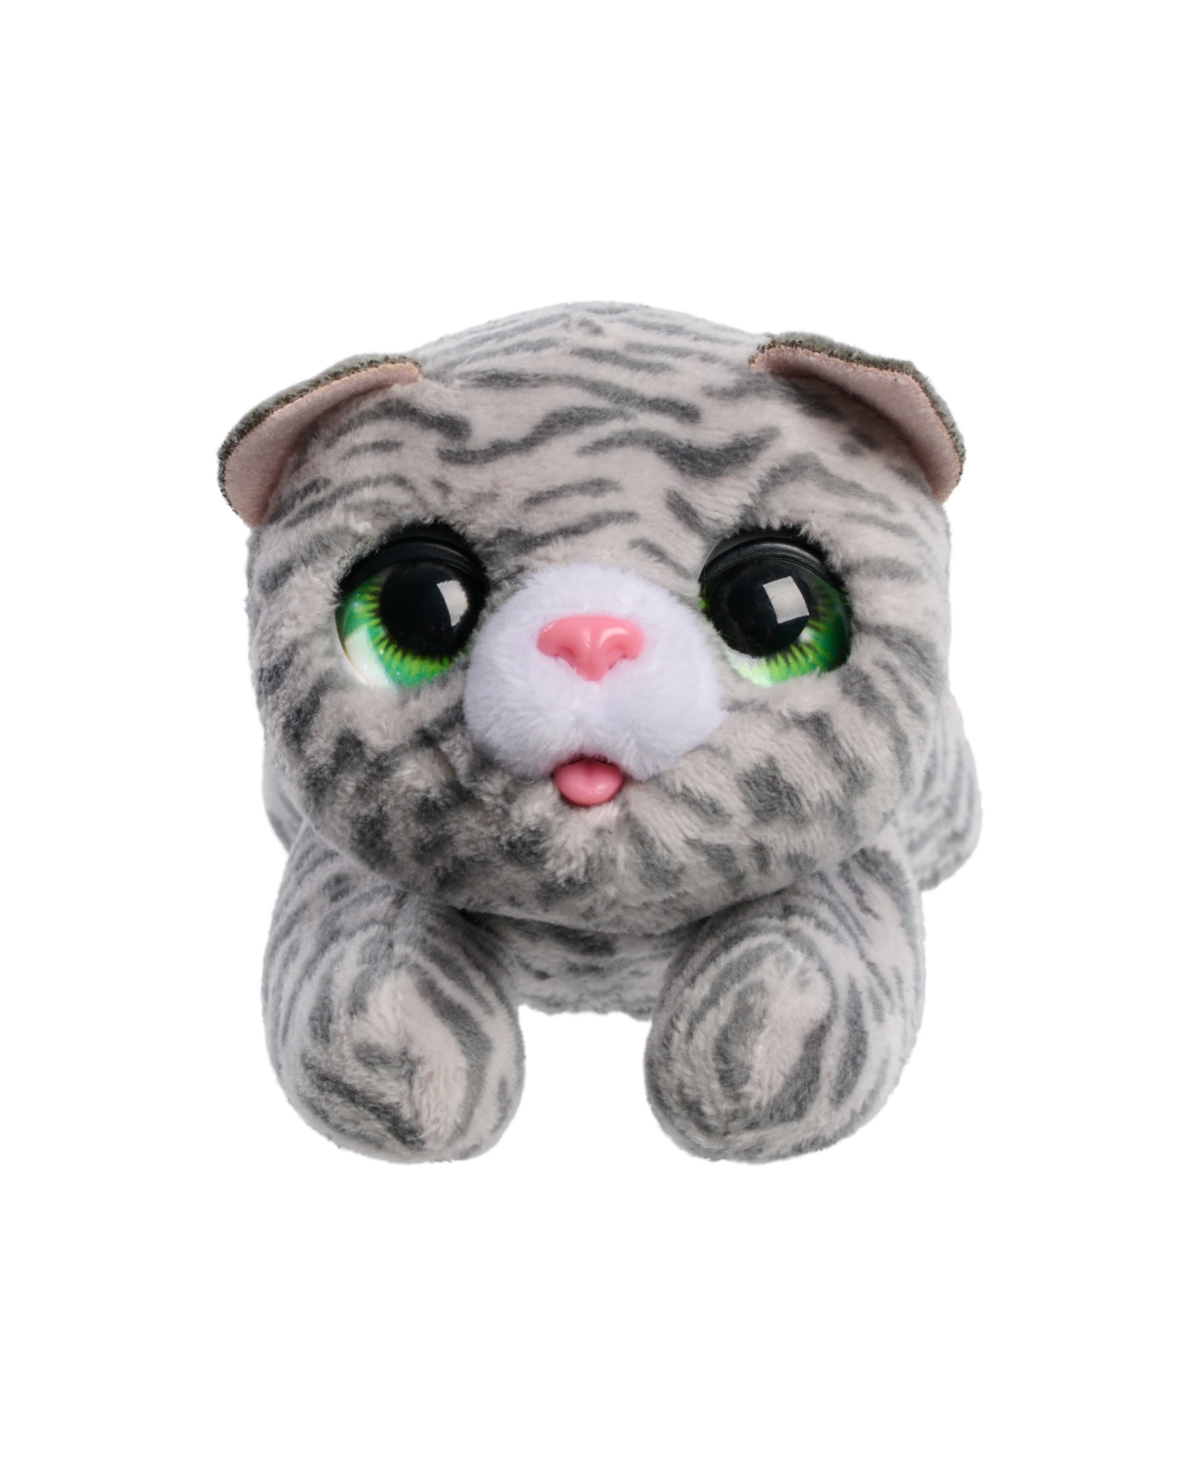 Shop Furreal Friends Newborns Kitty Interactive Pet, Small Plush Kitty With Sounds And Movement In No Color